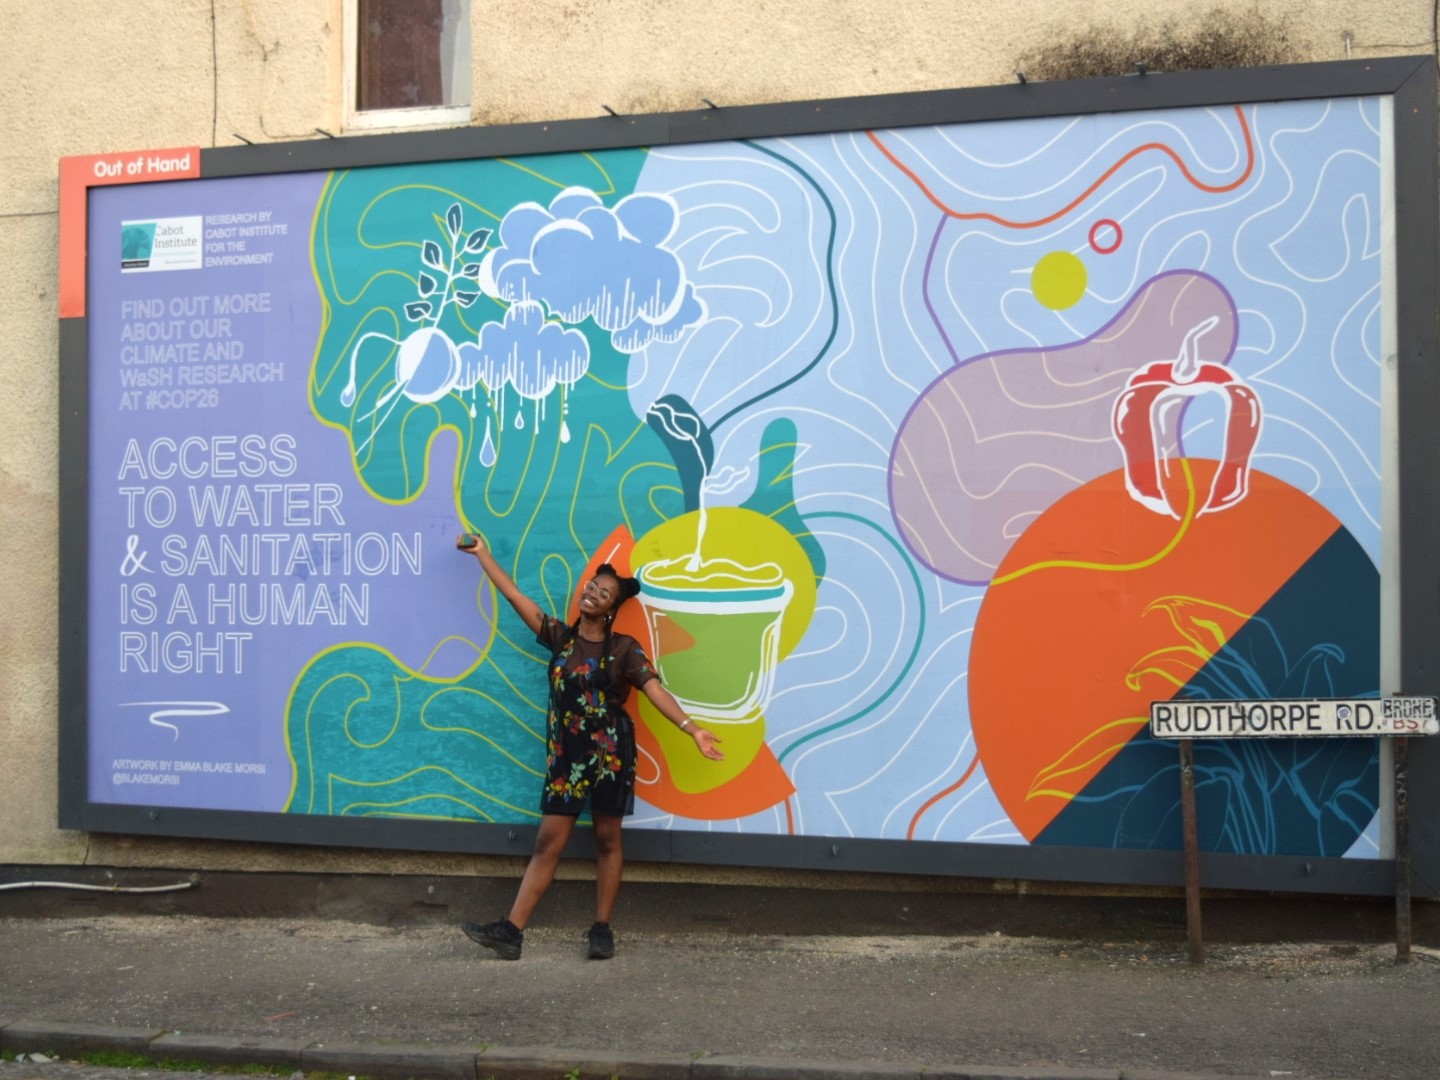 Emma Blake Morsi with one of the COP26 campaign billboard designs illustrating the importance of access to water and sanitation.